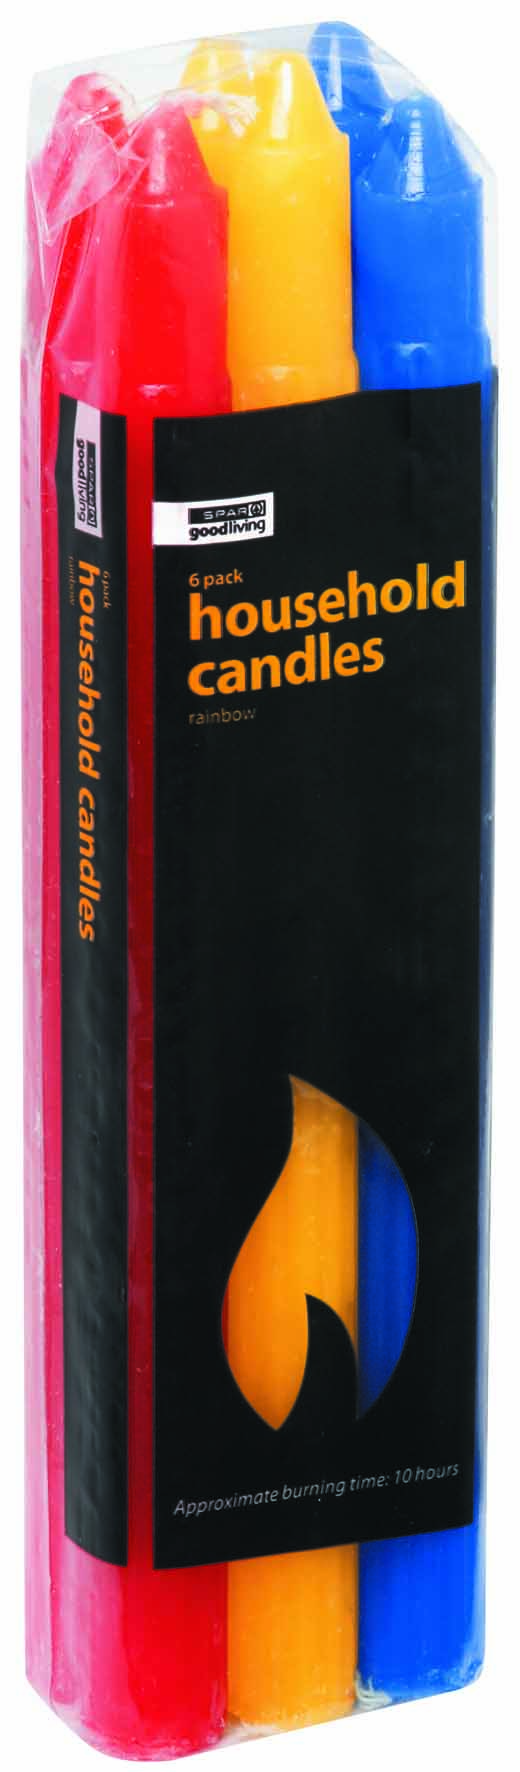 household candles - rainbow (6 piece)